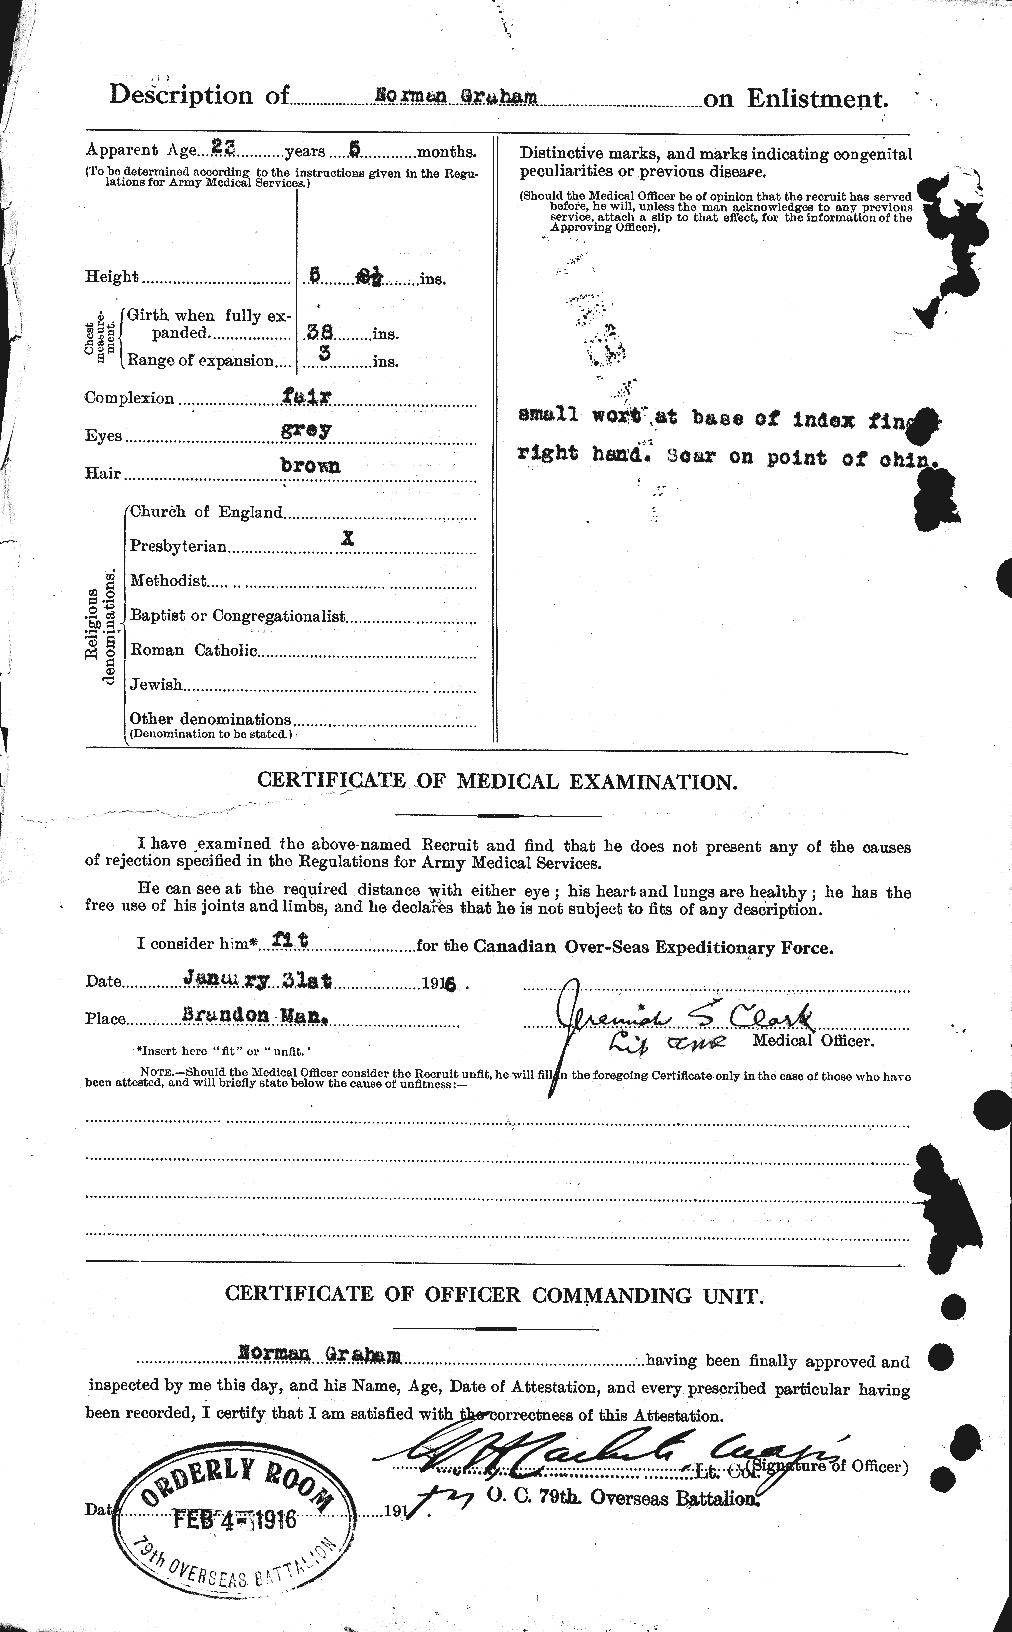 Personnel Records of the First World War - CEF 359321b